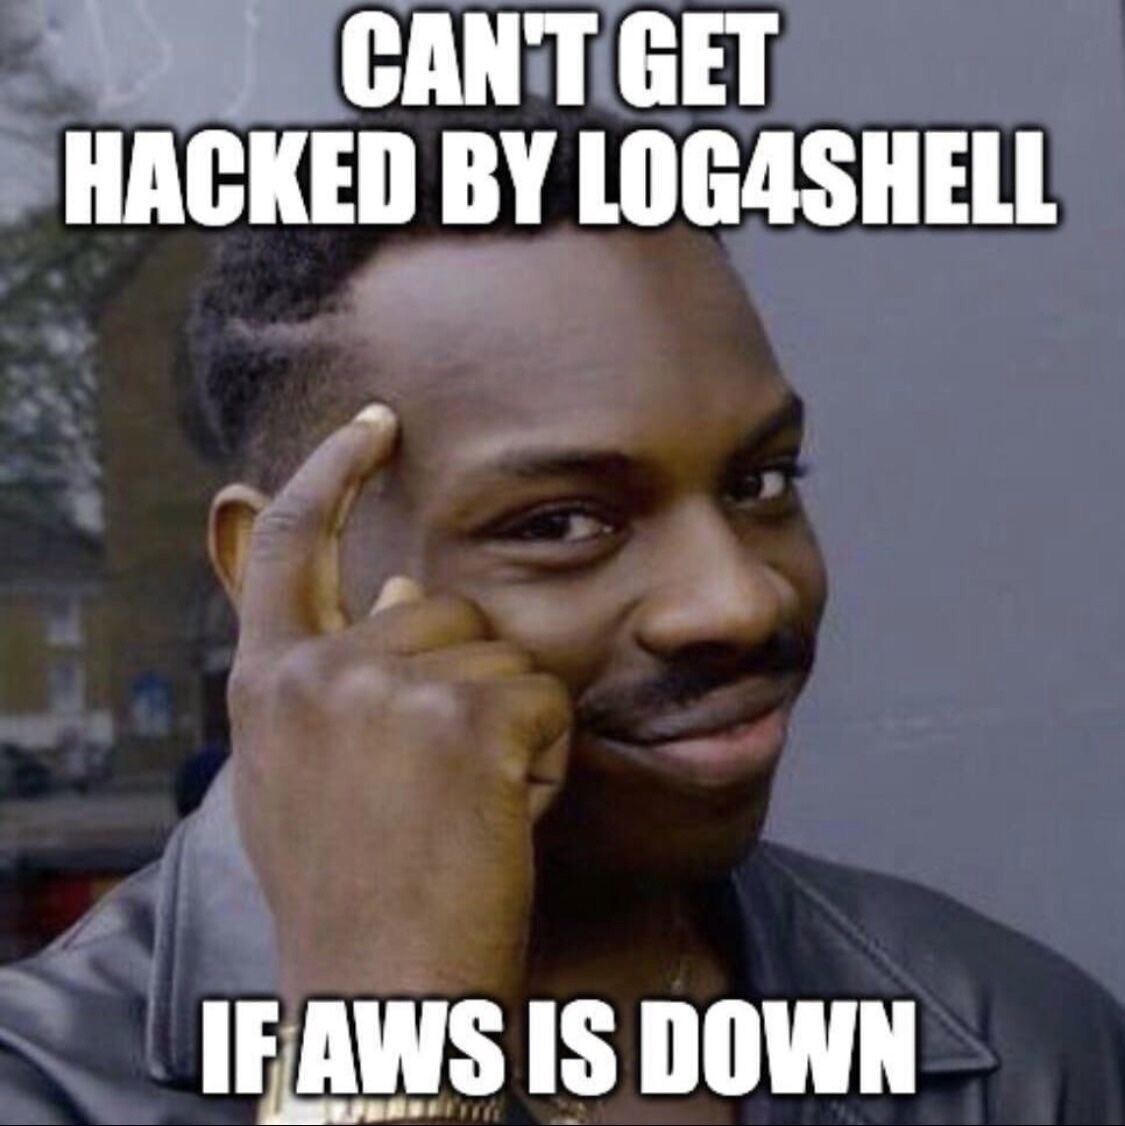 Looks like someone else remembered the big AWS outage a few weeks ago enough to make this gem. https://t.co/vB5ZDV1d63 https://t.co/bTWEnypiIj